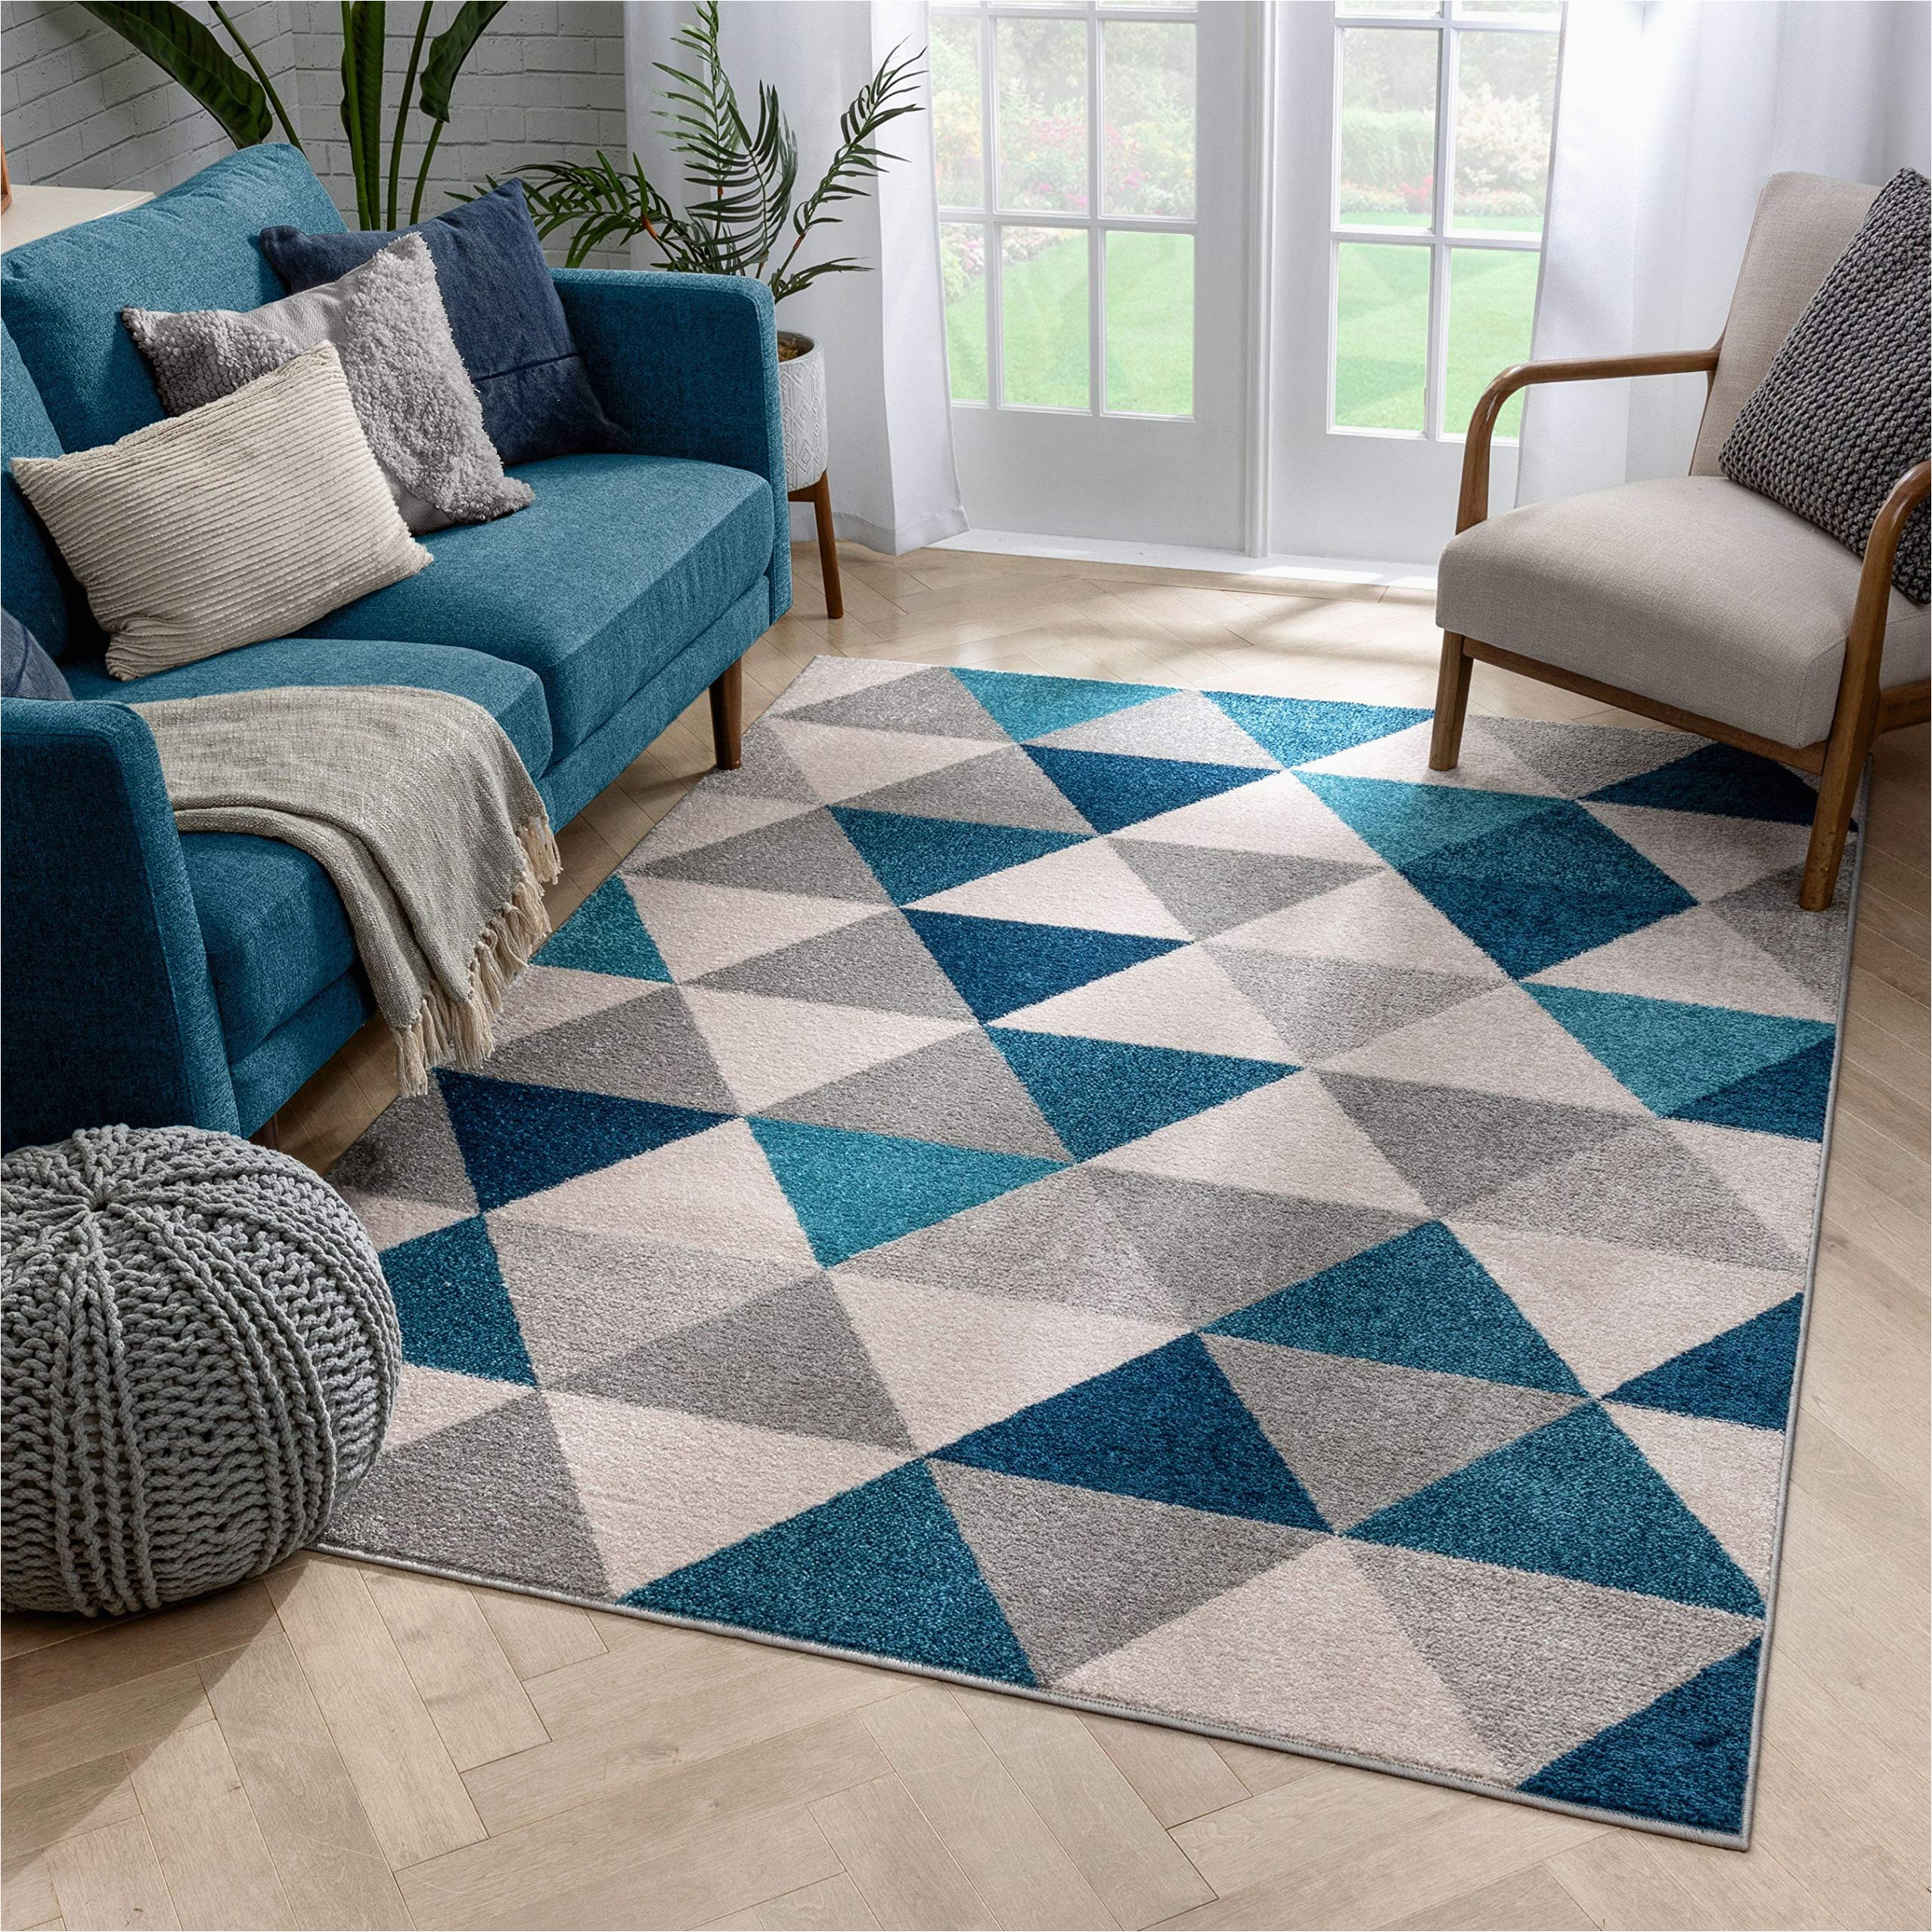 Blue Gray Geometric Rug Well Woven isometry Blue & Grey Modern Geometric Triangle Pattern (5’3″ X 7’3″) area Rug soft Shed Free Easy to Clean Stain Resistant